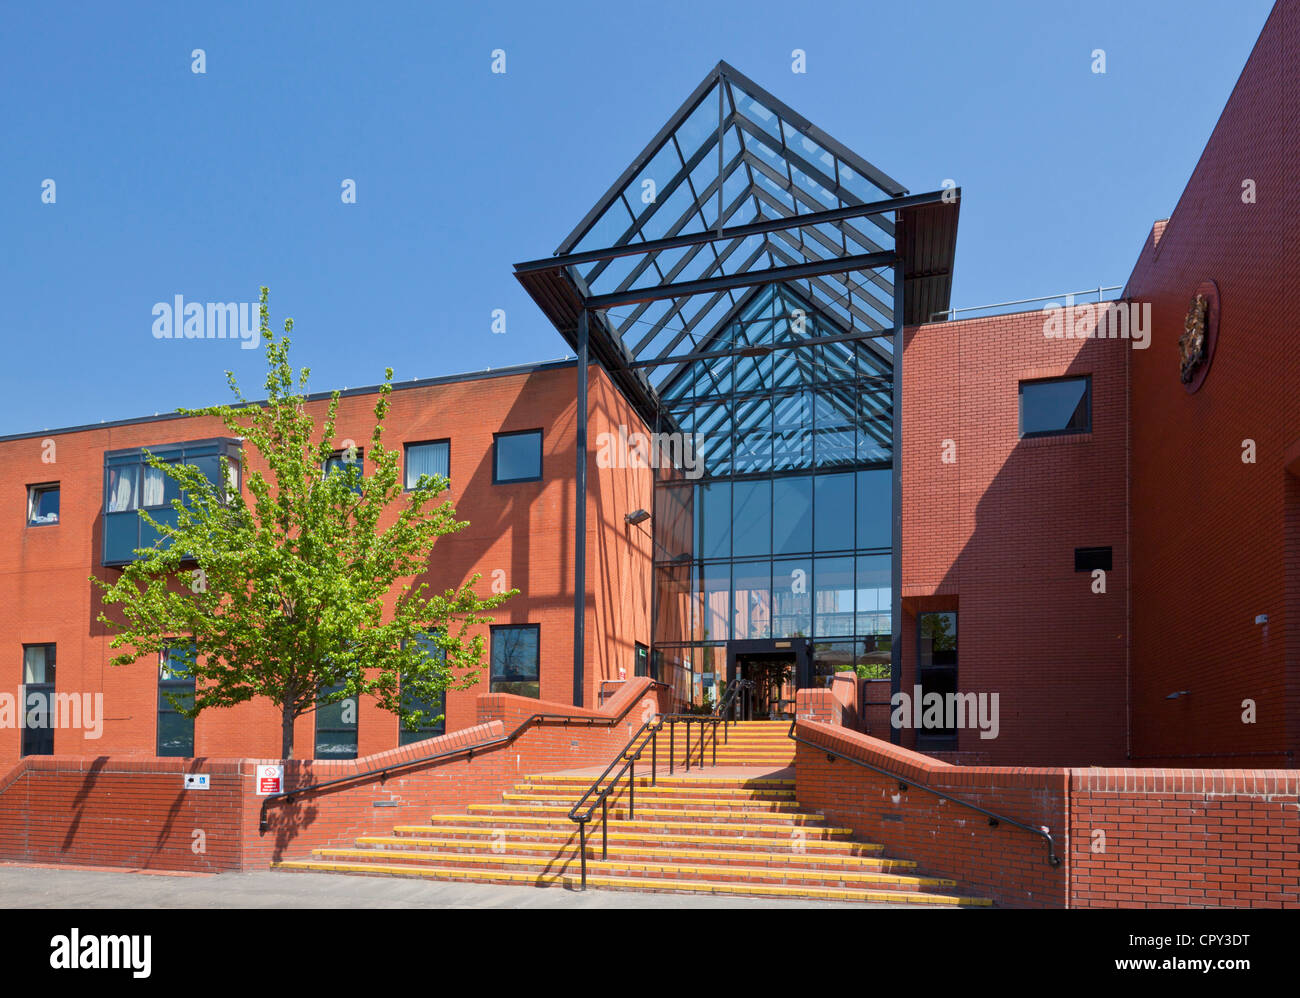 Leicester crown court Leicestershire East Midlands England UK GB EU Europe Stock Photo